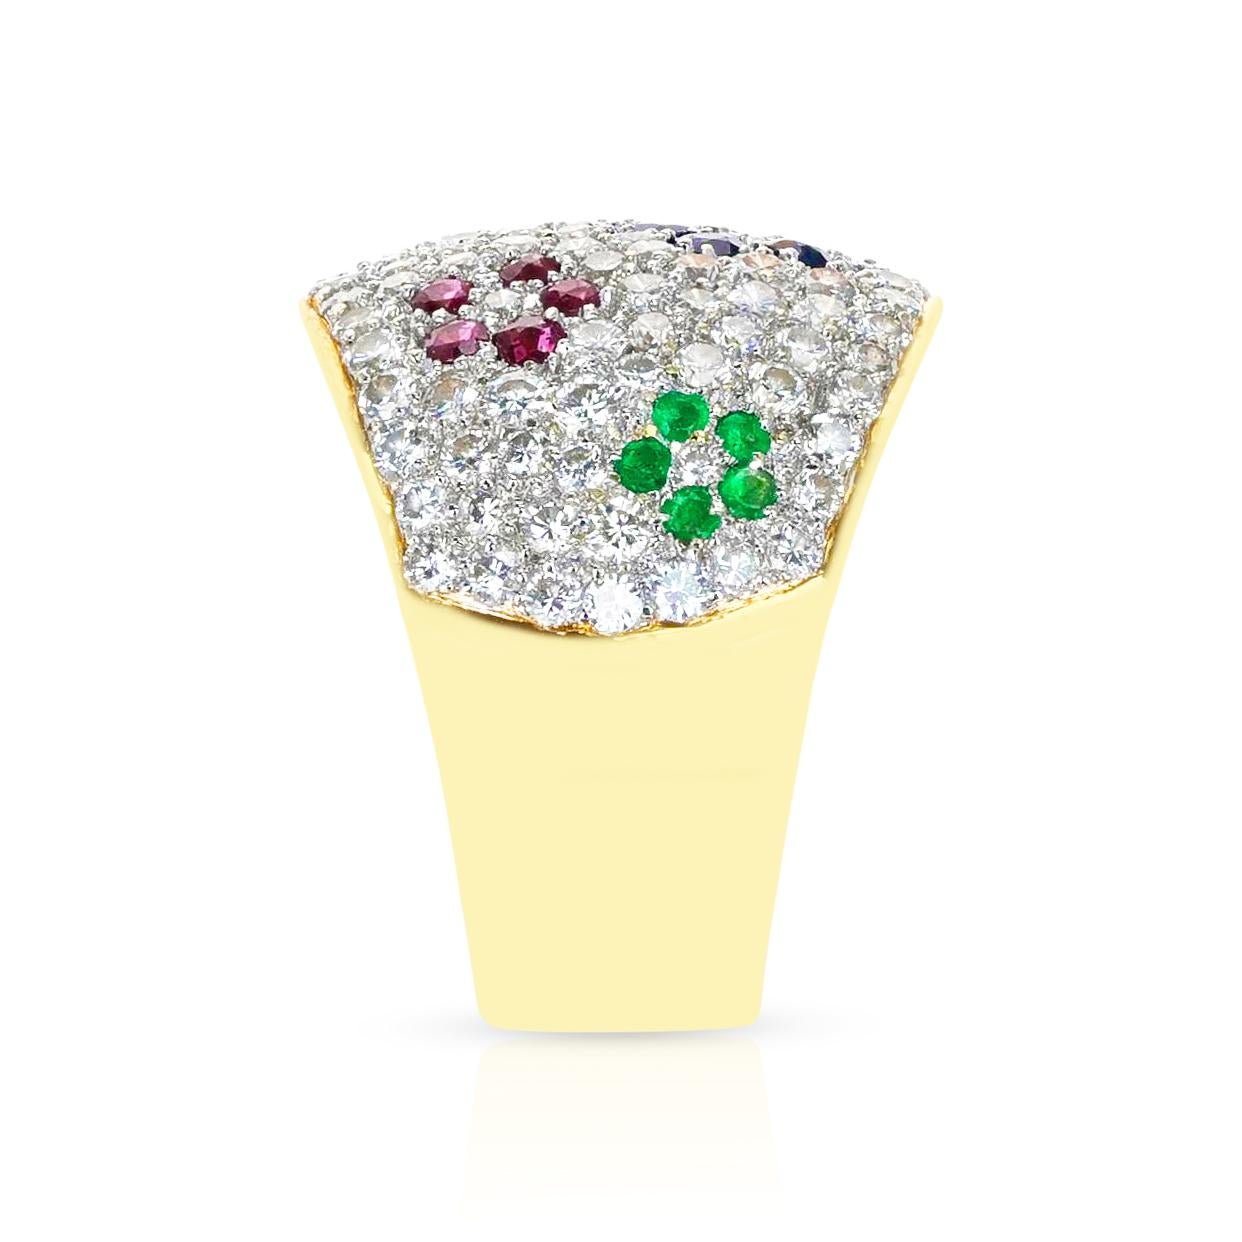 Round Cut Diamond, Emerald, Ruby and Sapphire Floral Design Cocktail Ring, 18k